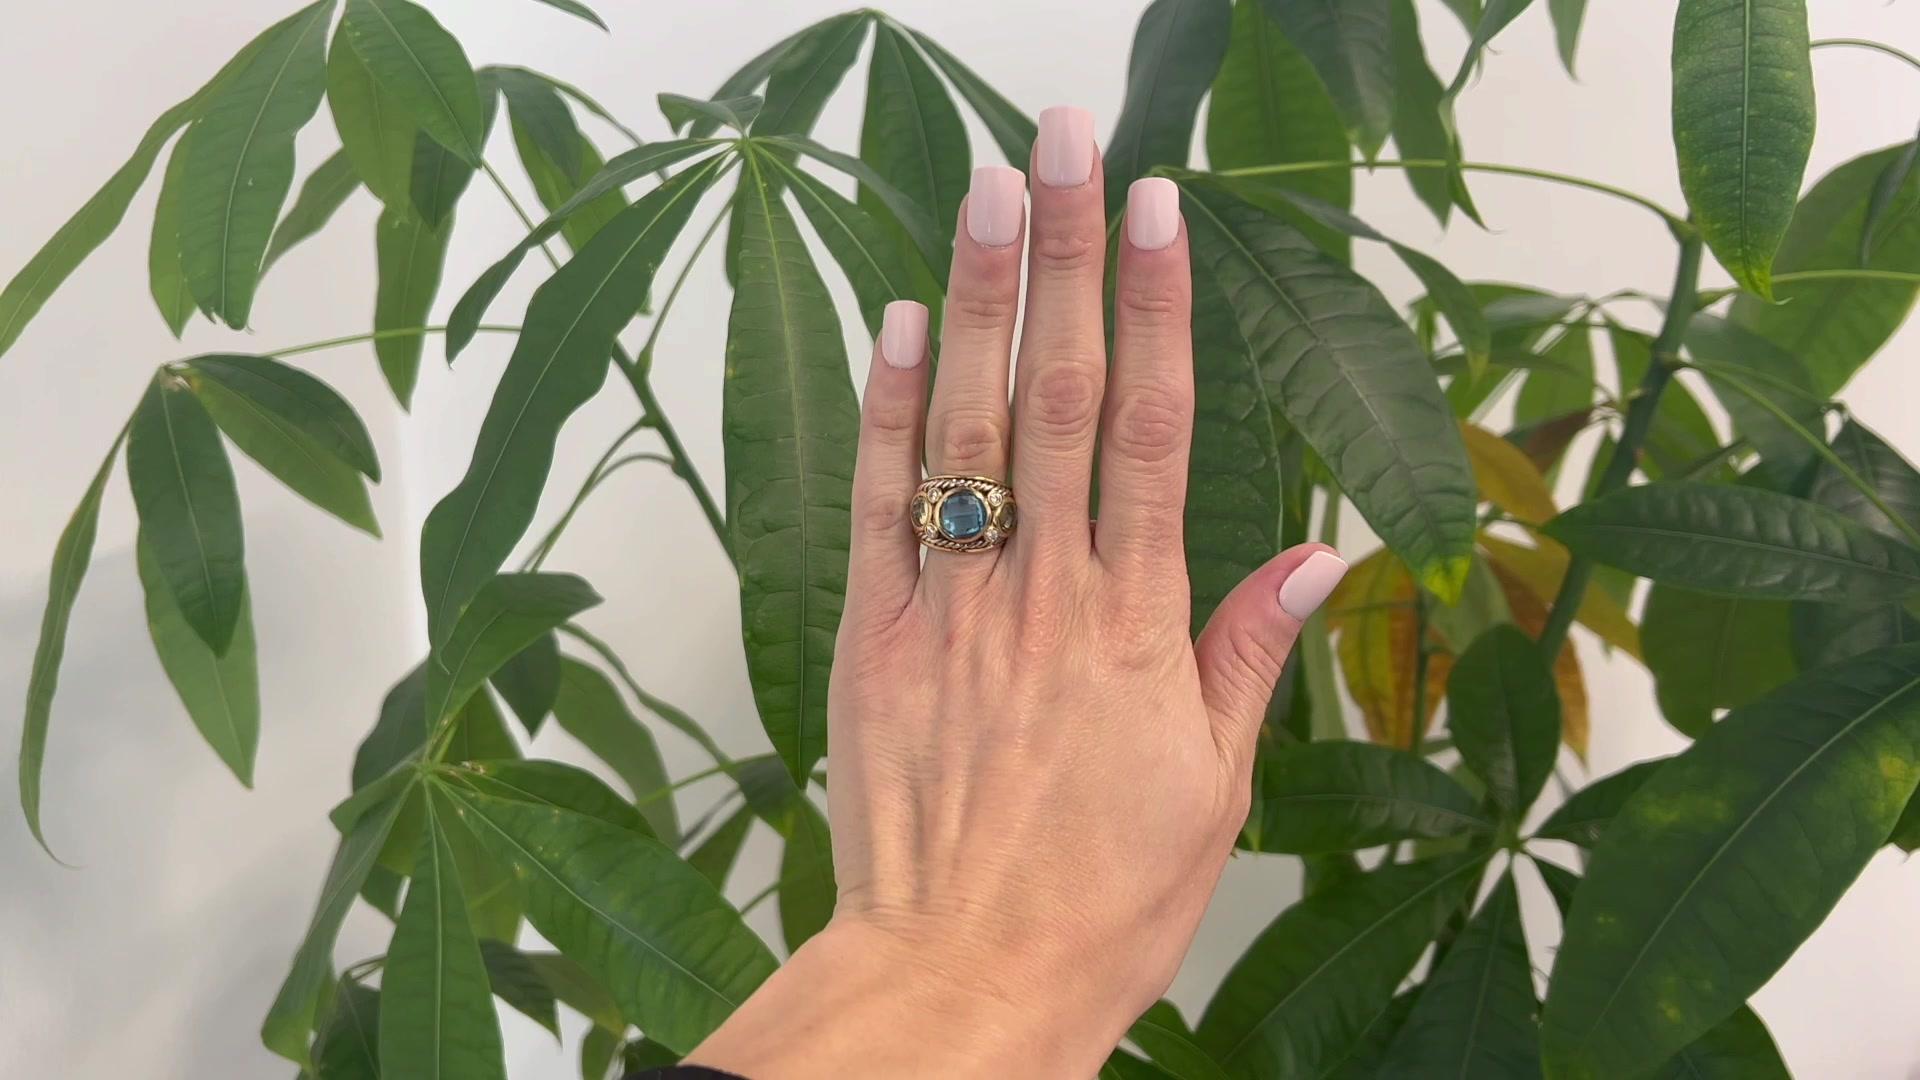 One Vintage David Yurman Blue Topaz Prasiolite Diamond 18K Gold Silver Renaissance Ring. Featuring one round faceted swiss blue topaz weighing approximately 5.50 carats. Accented by two round faceted prasiolite with a total weight of approximately